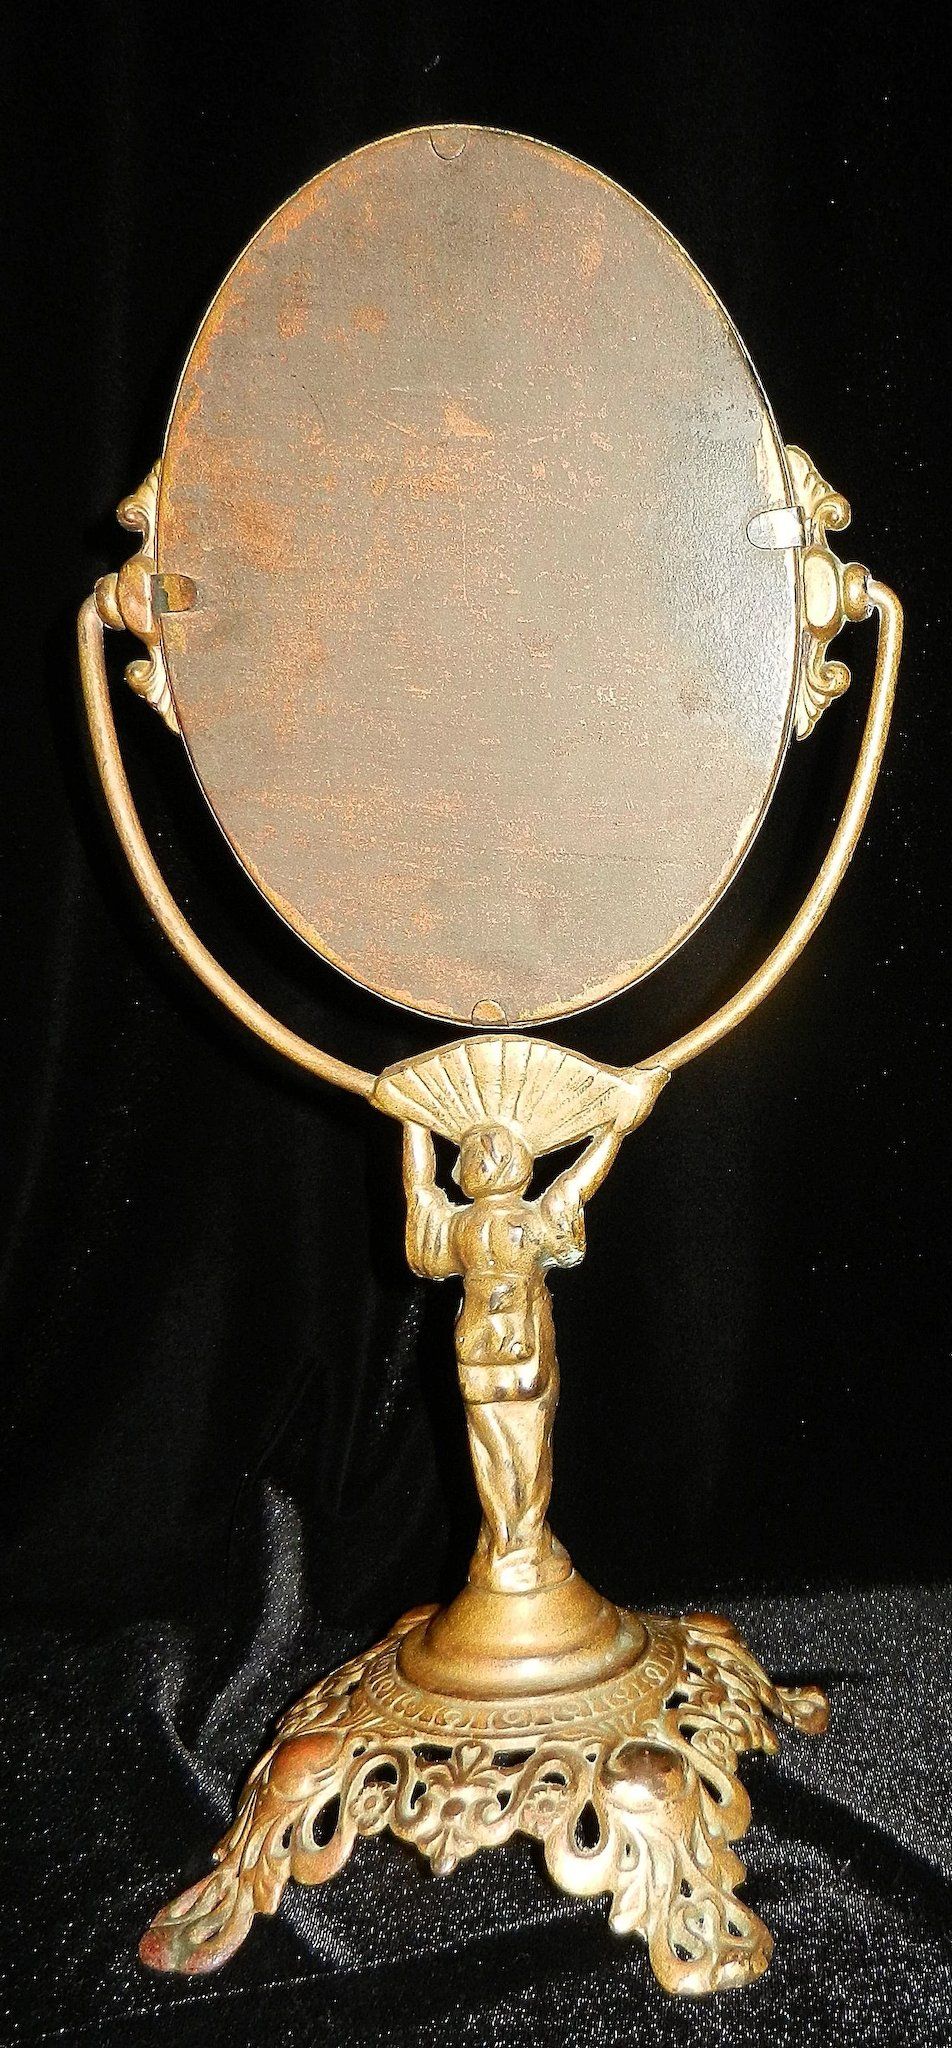 Antique Cast Iron Vanity Mirror With Geisha Girl Base : My Grandmother Throughout Antique Iron Standing Mirrors (View 15 of 15)